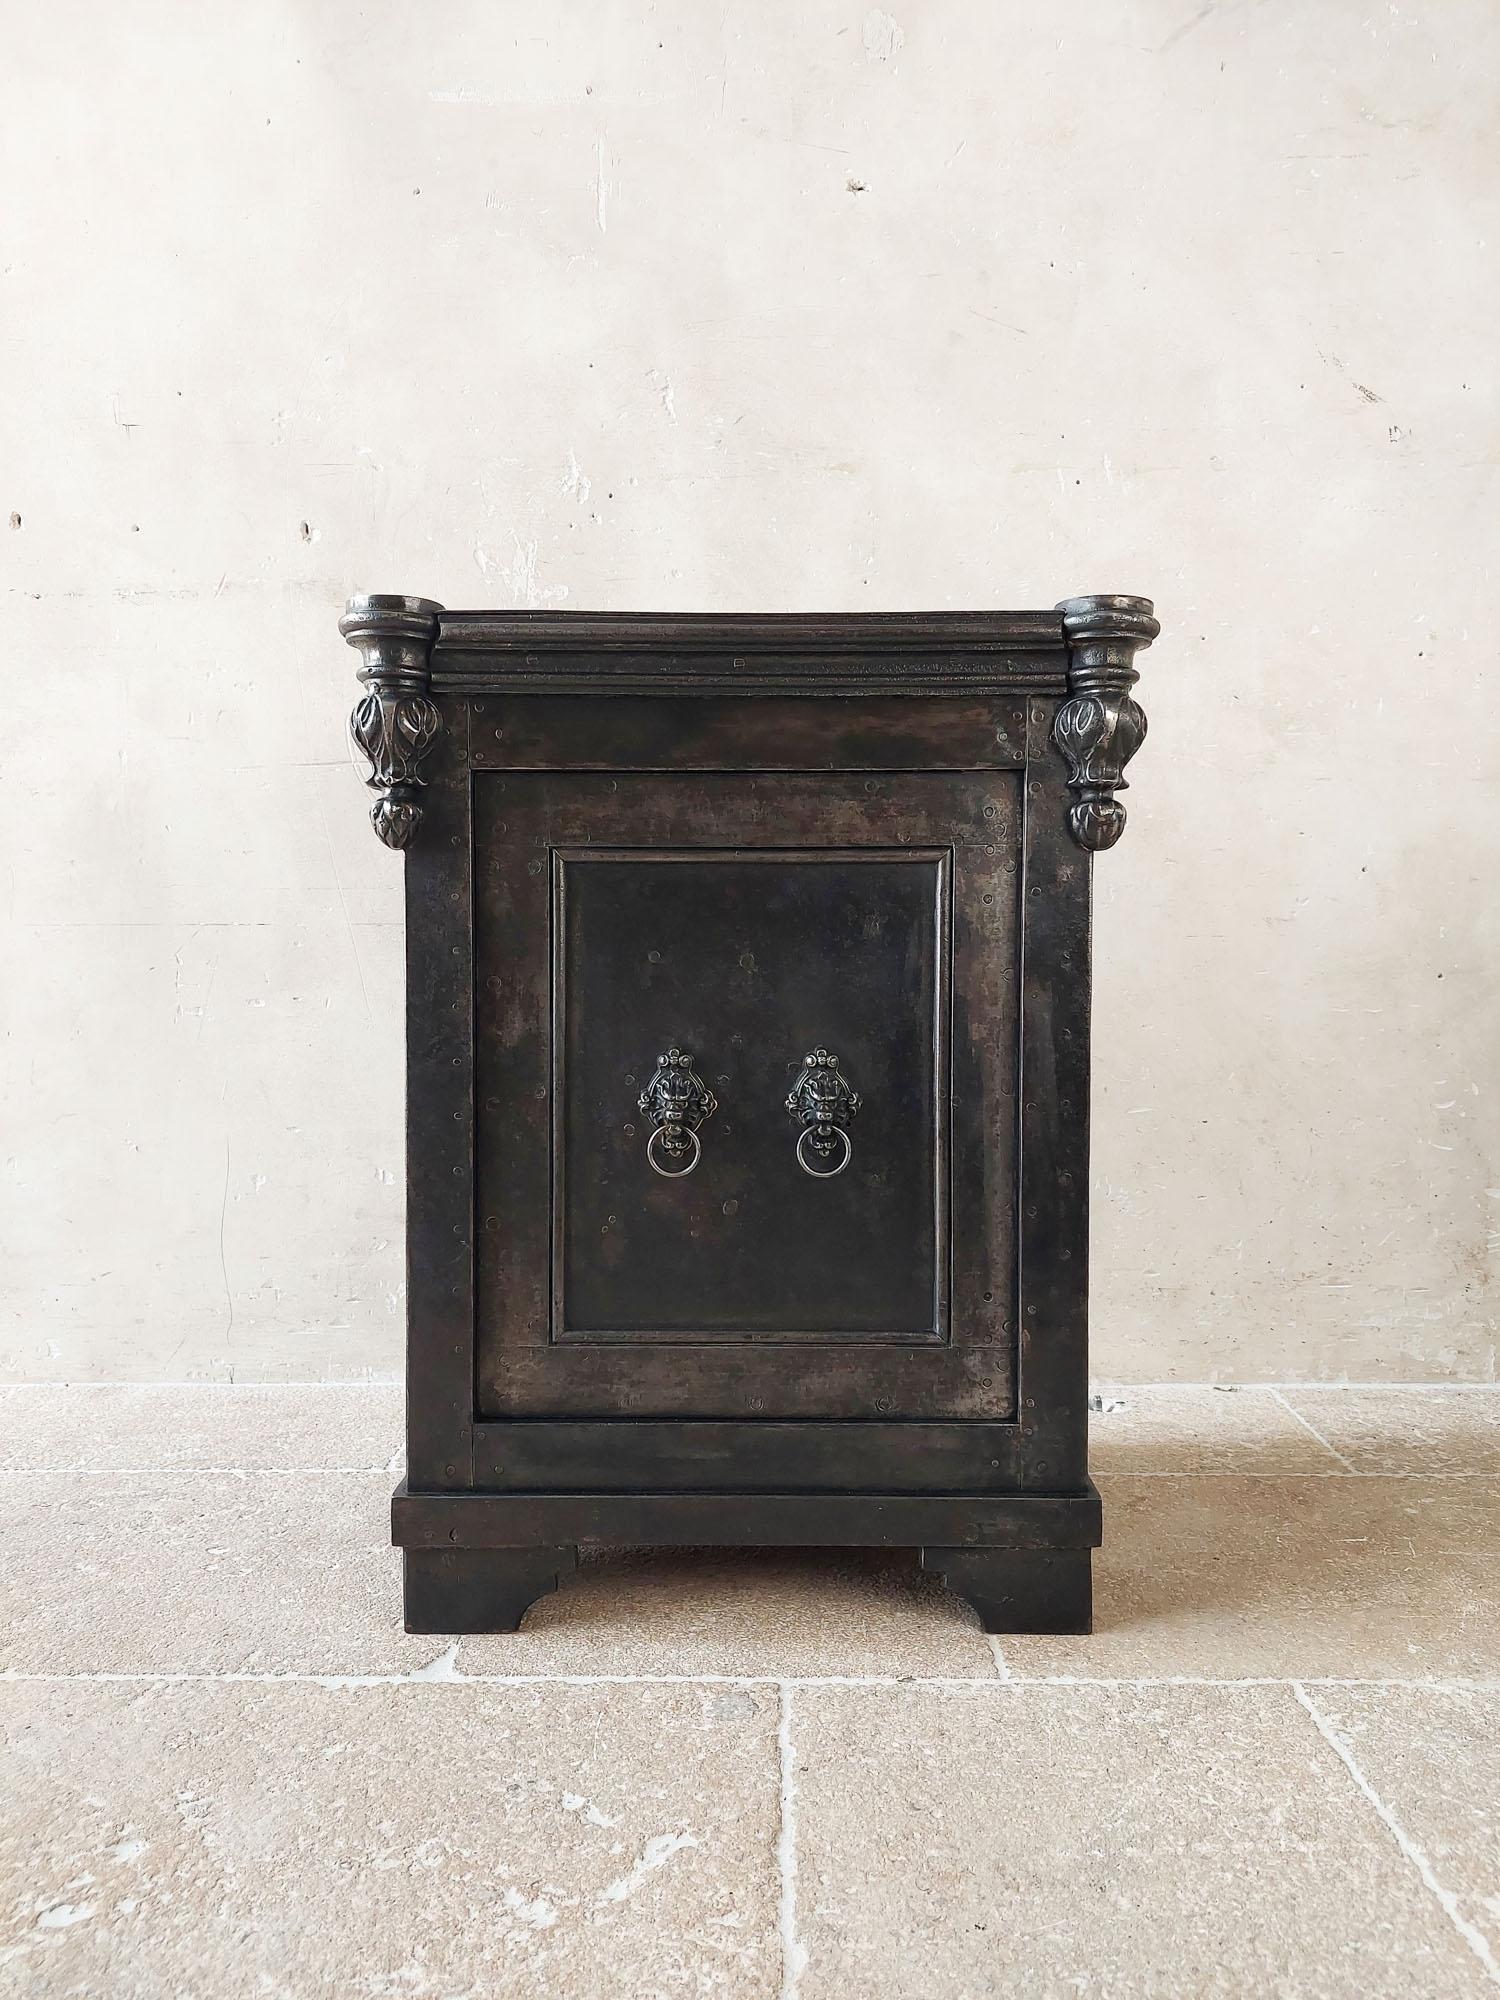 Antique French wrought iron safe, circa 1870. Partly riveted and quite unique due to its beautiful cast iron ornaments on the corners and the lion’s heads. This locker also has a safe function with insulated wall and 2 doors.

h 78.5 x w 61.5 x d